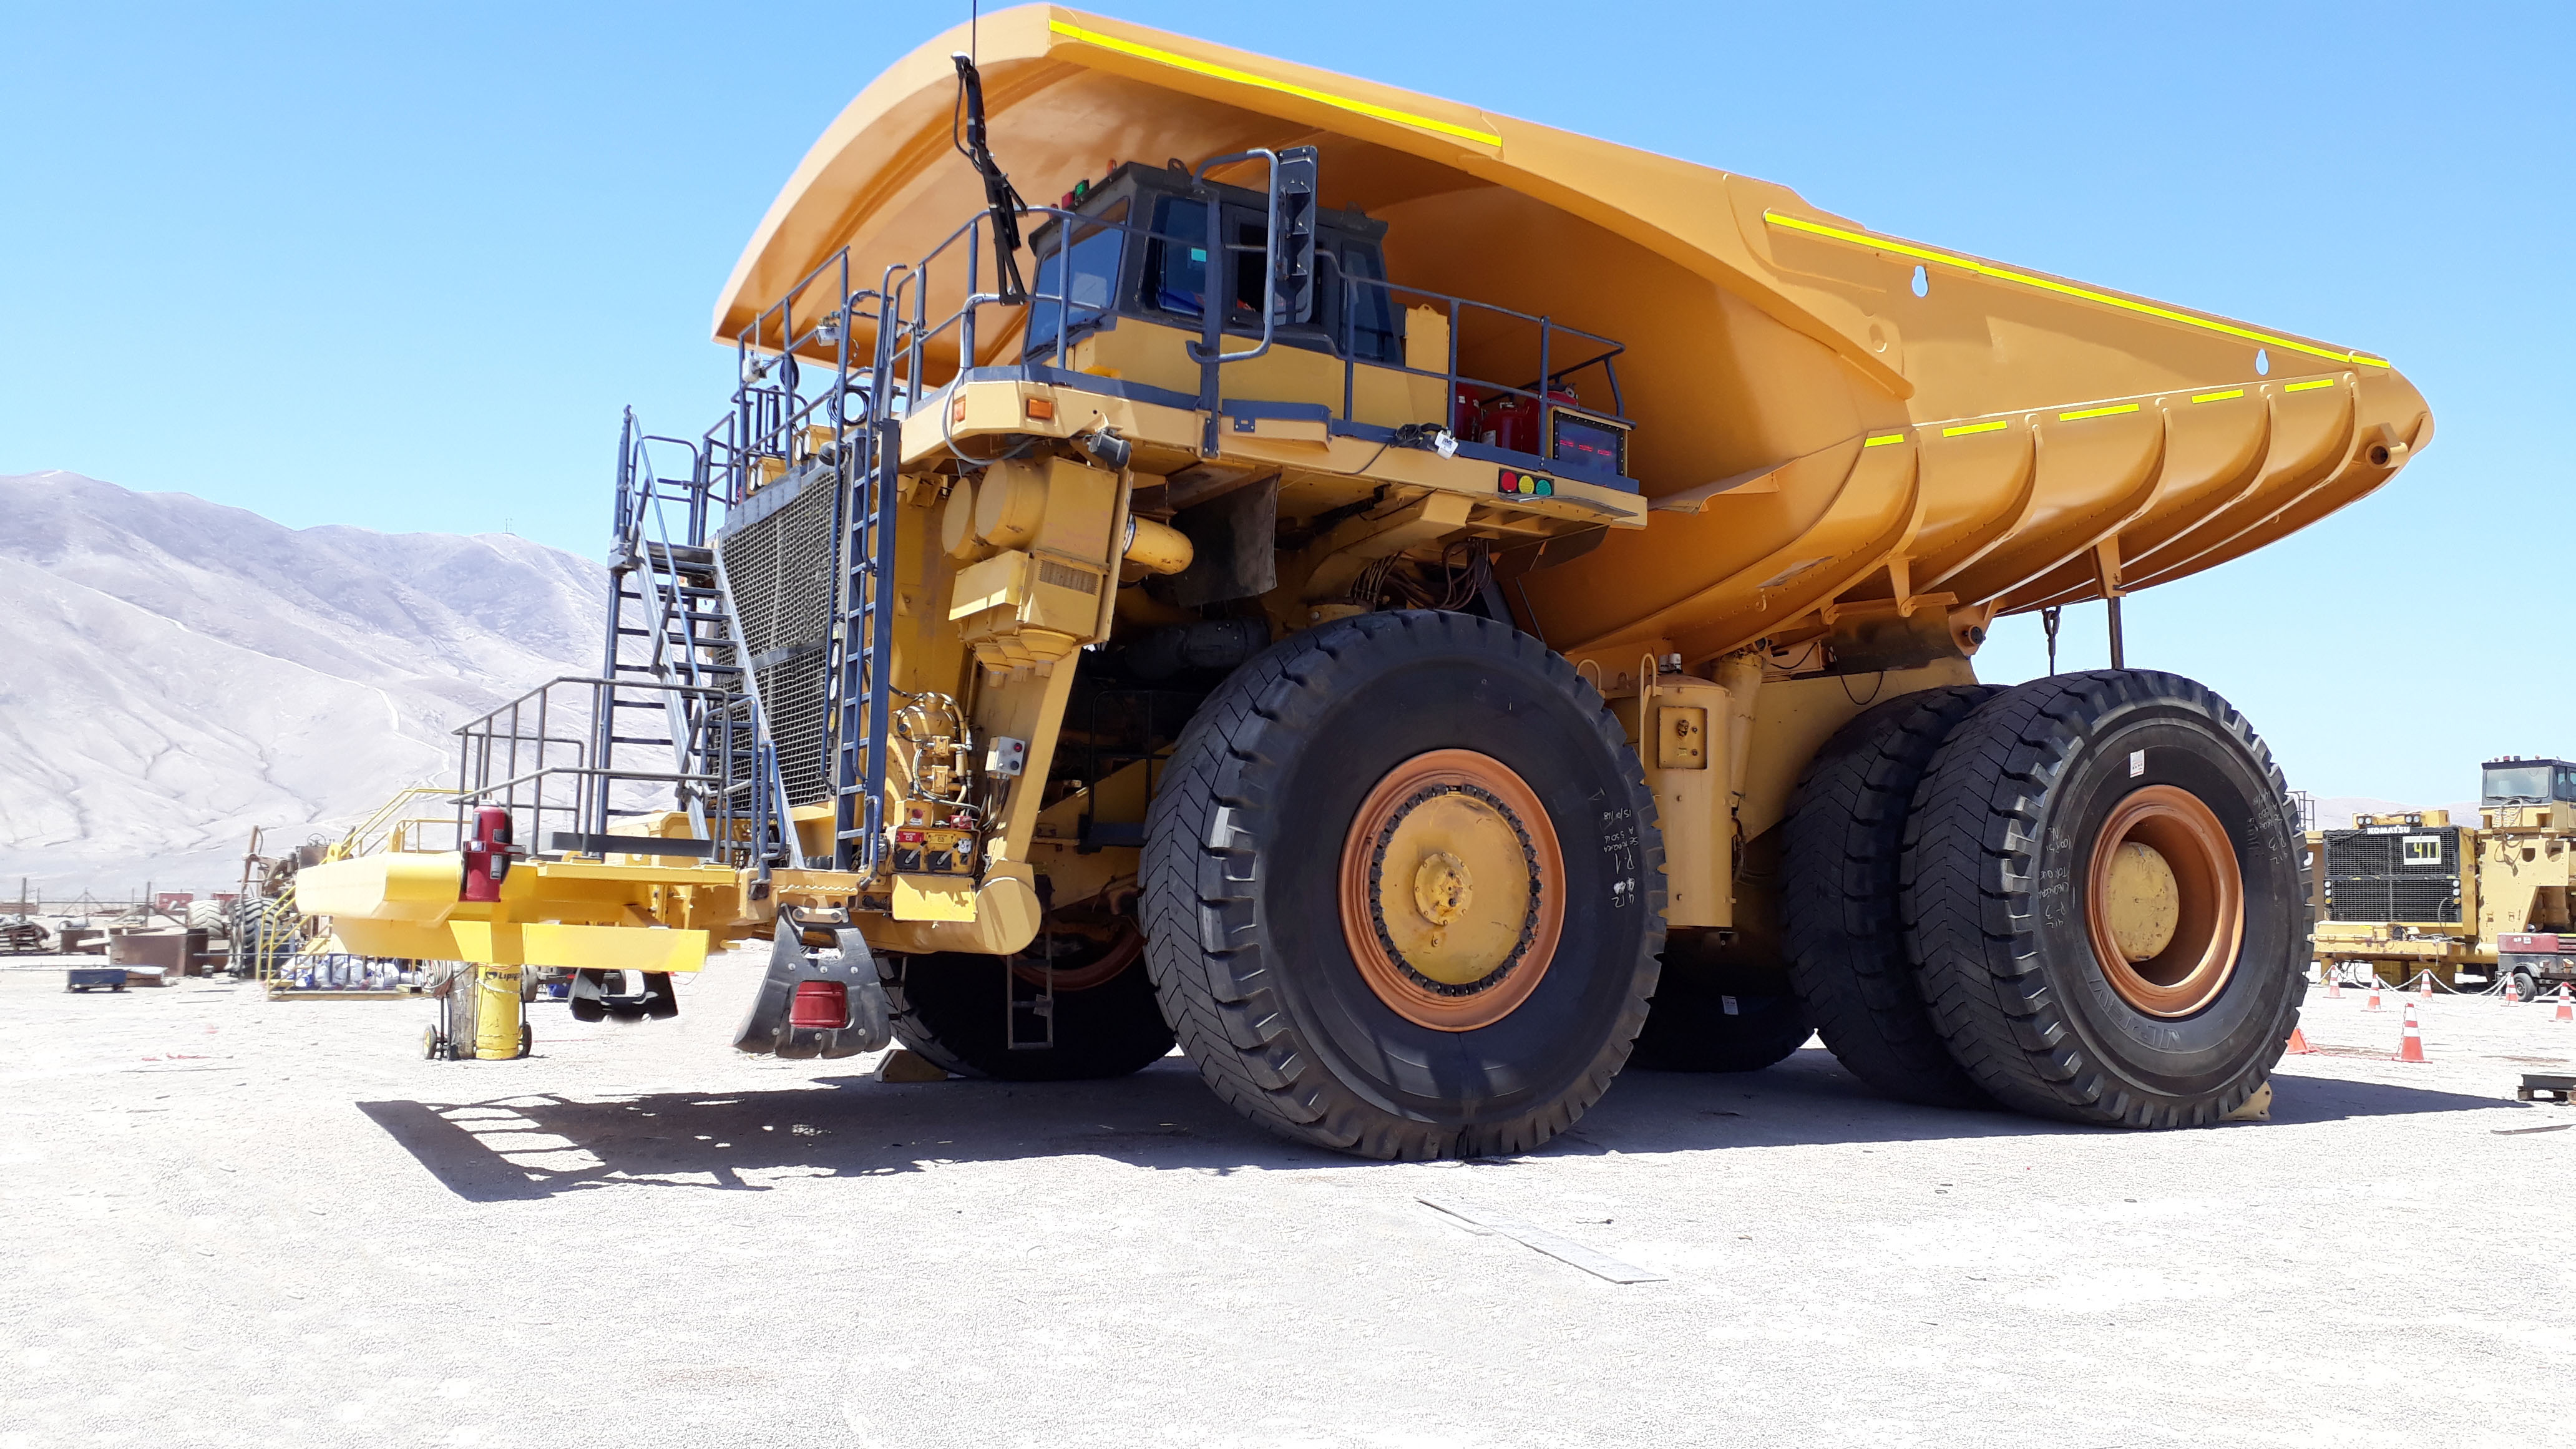 A relocated 830E AC trucks proudly displayed at the Mantos Copper mine in Antofagasta. Chile.